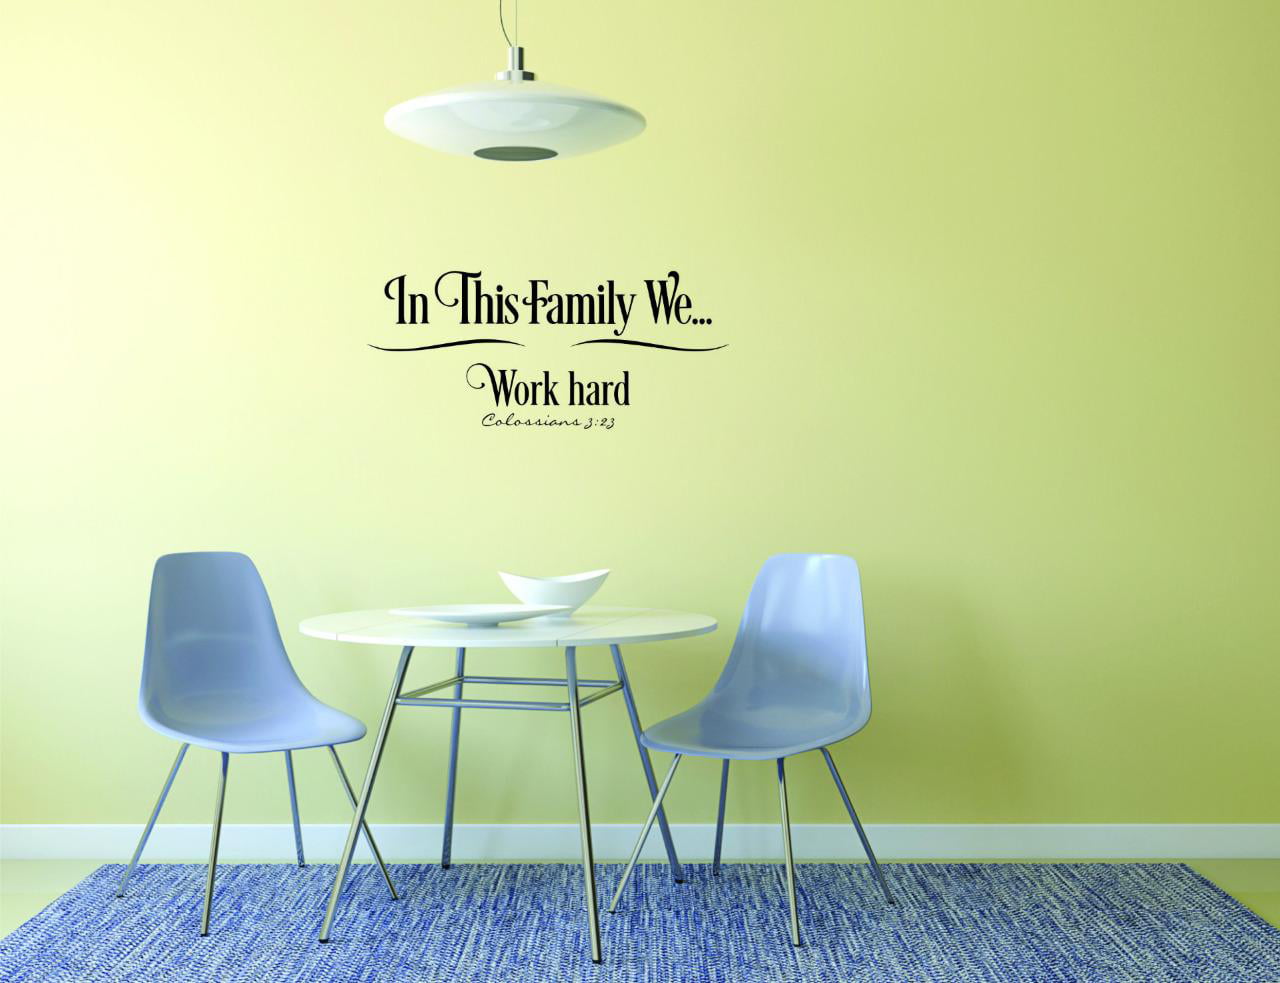 Design with Vinyl Moti 2548 1 Decal Black Size 10 Inches x 20 Inches in This Family We Peel & Stick Wall Sticker Work Hard Living Room Quote Color